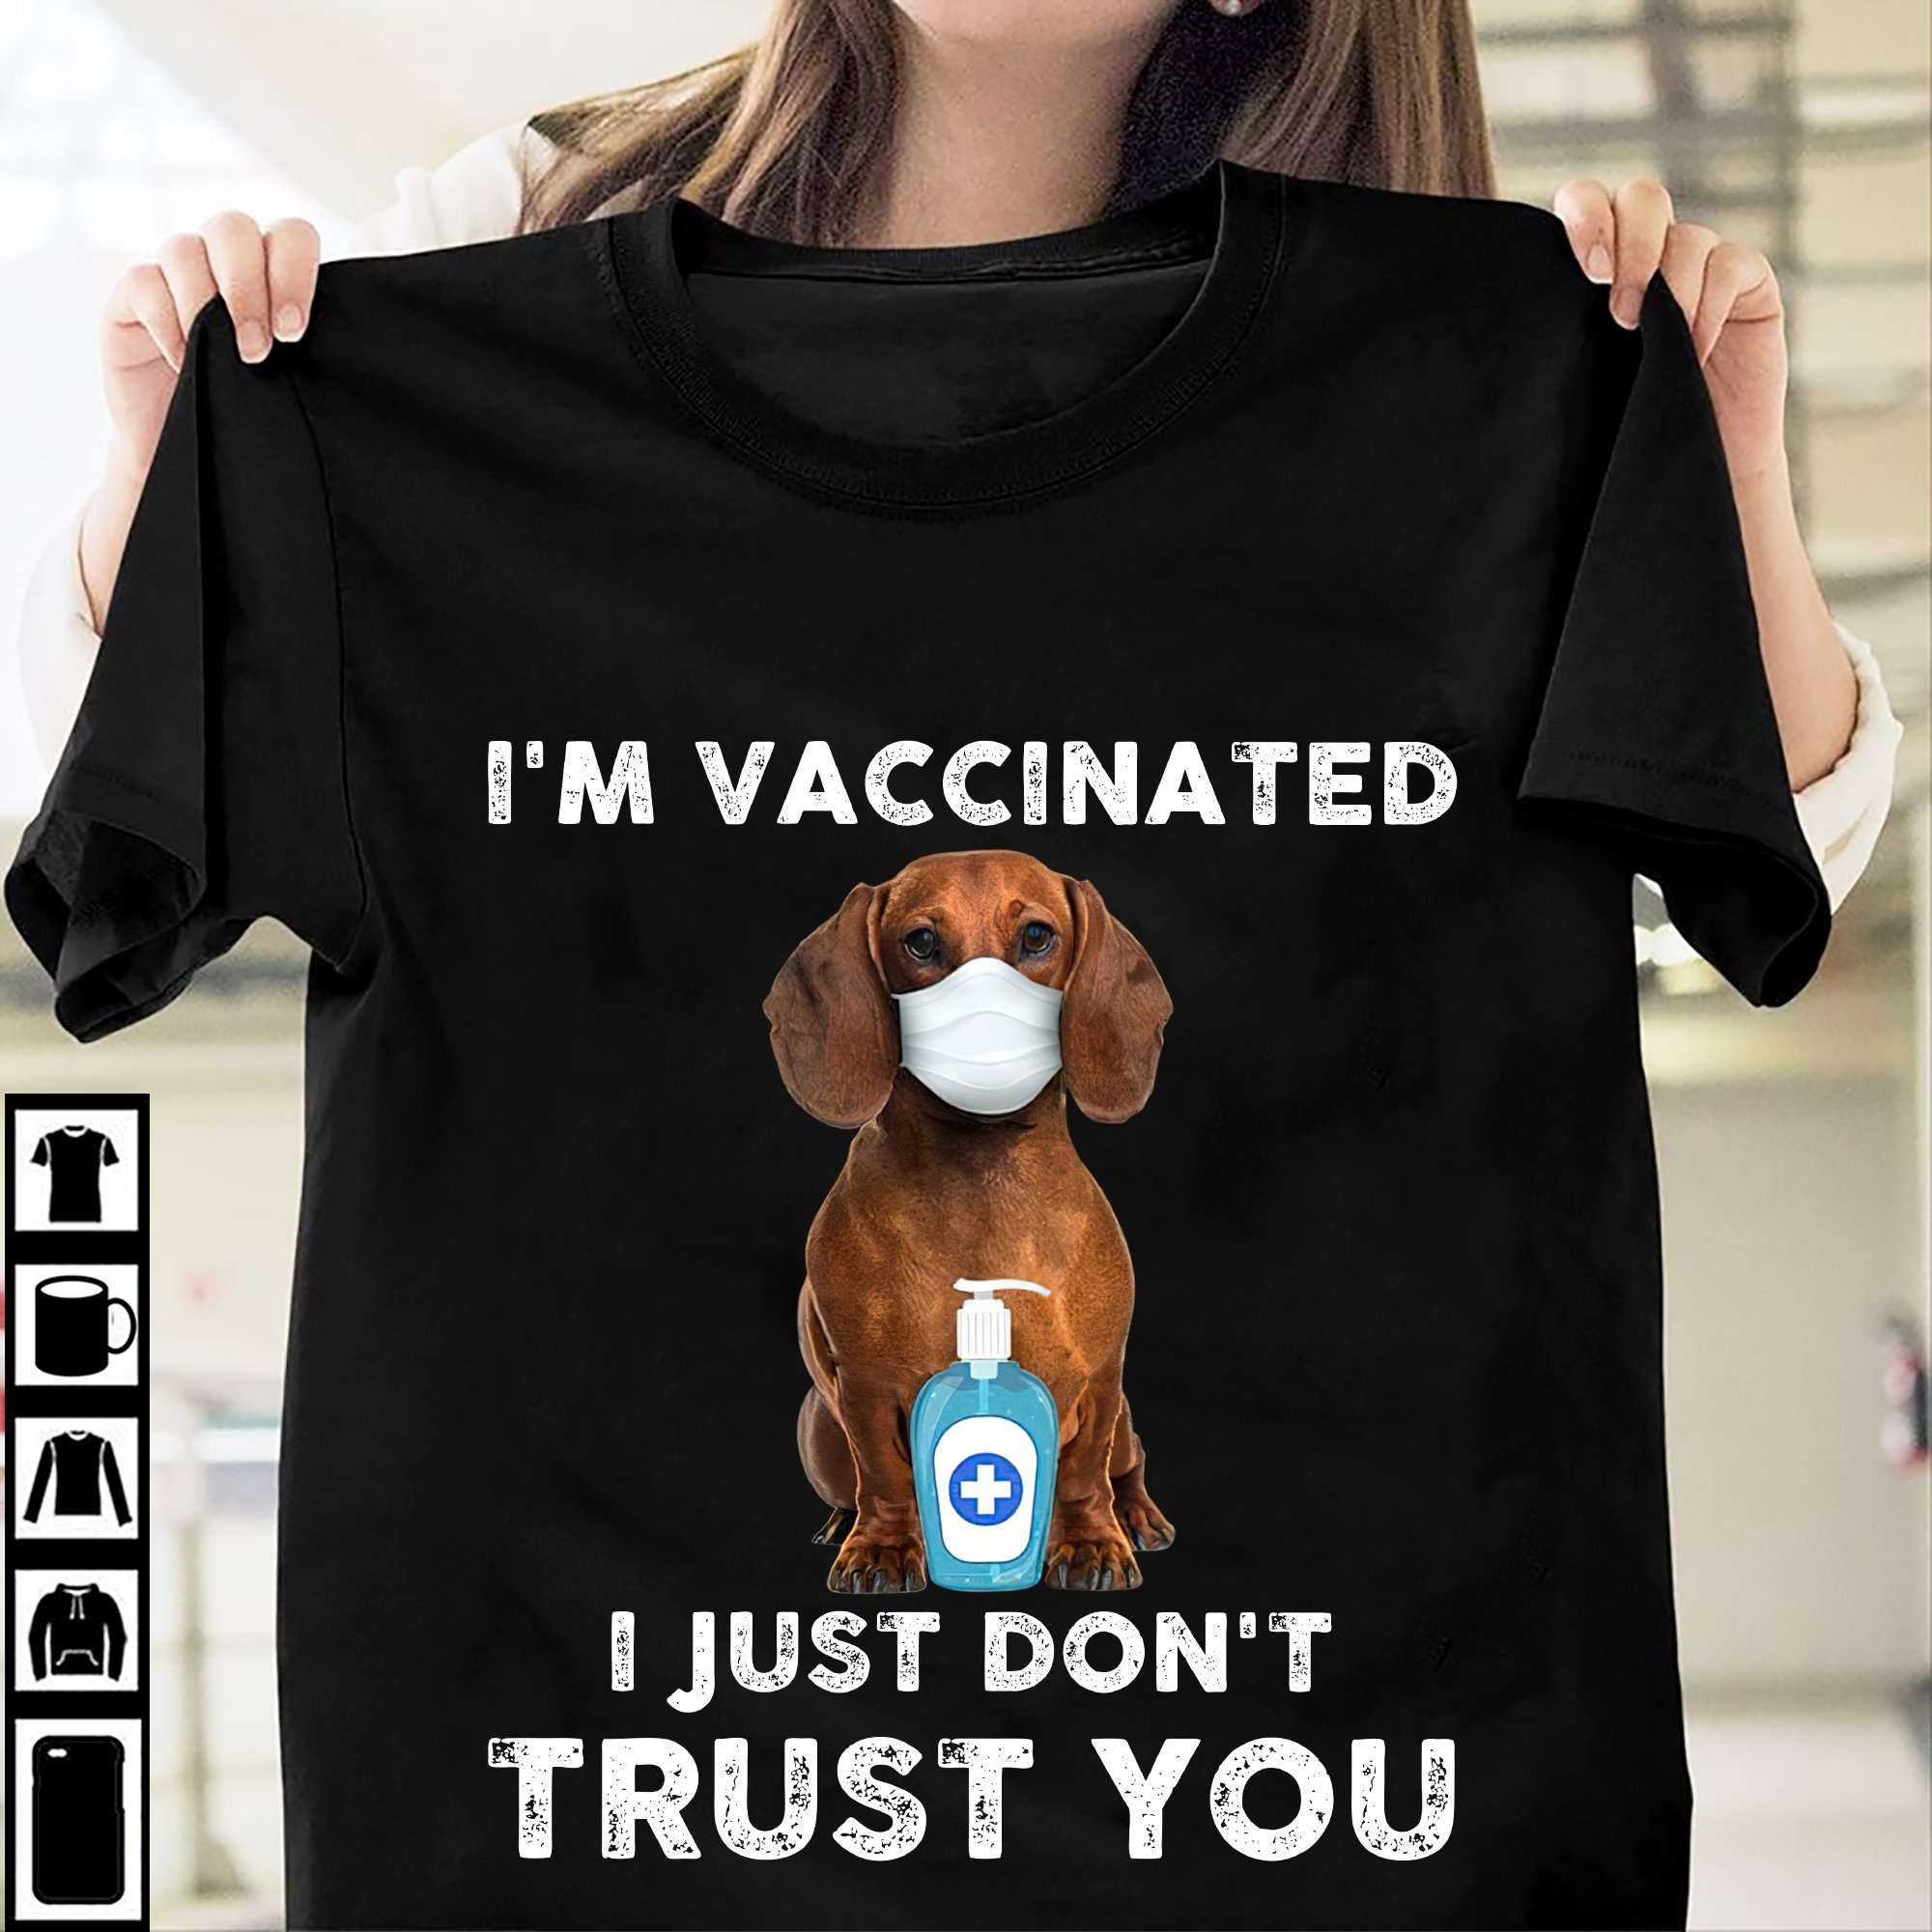 I'm vaccinated I just don't trust you - Dachshund with mask, vaccinated people